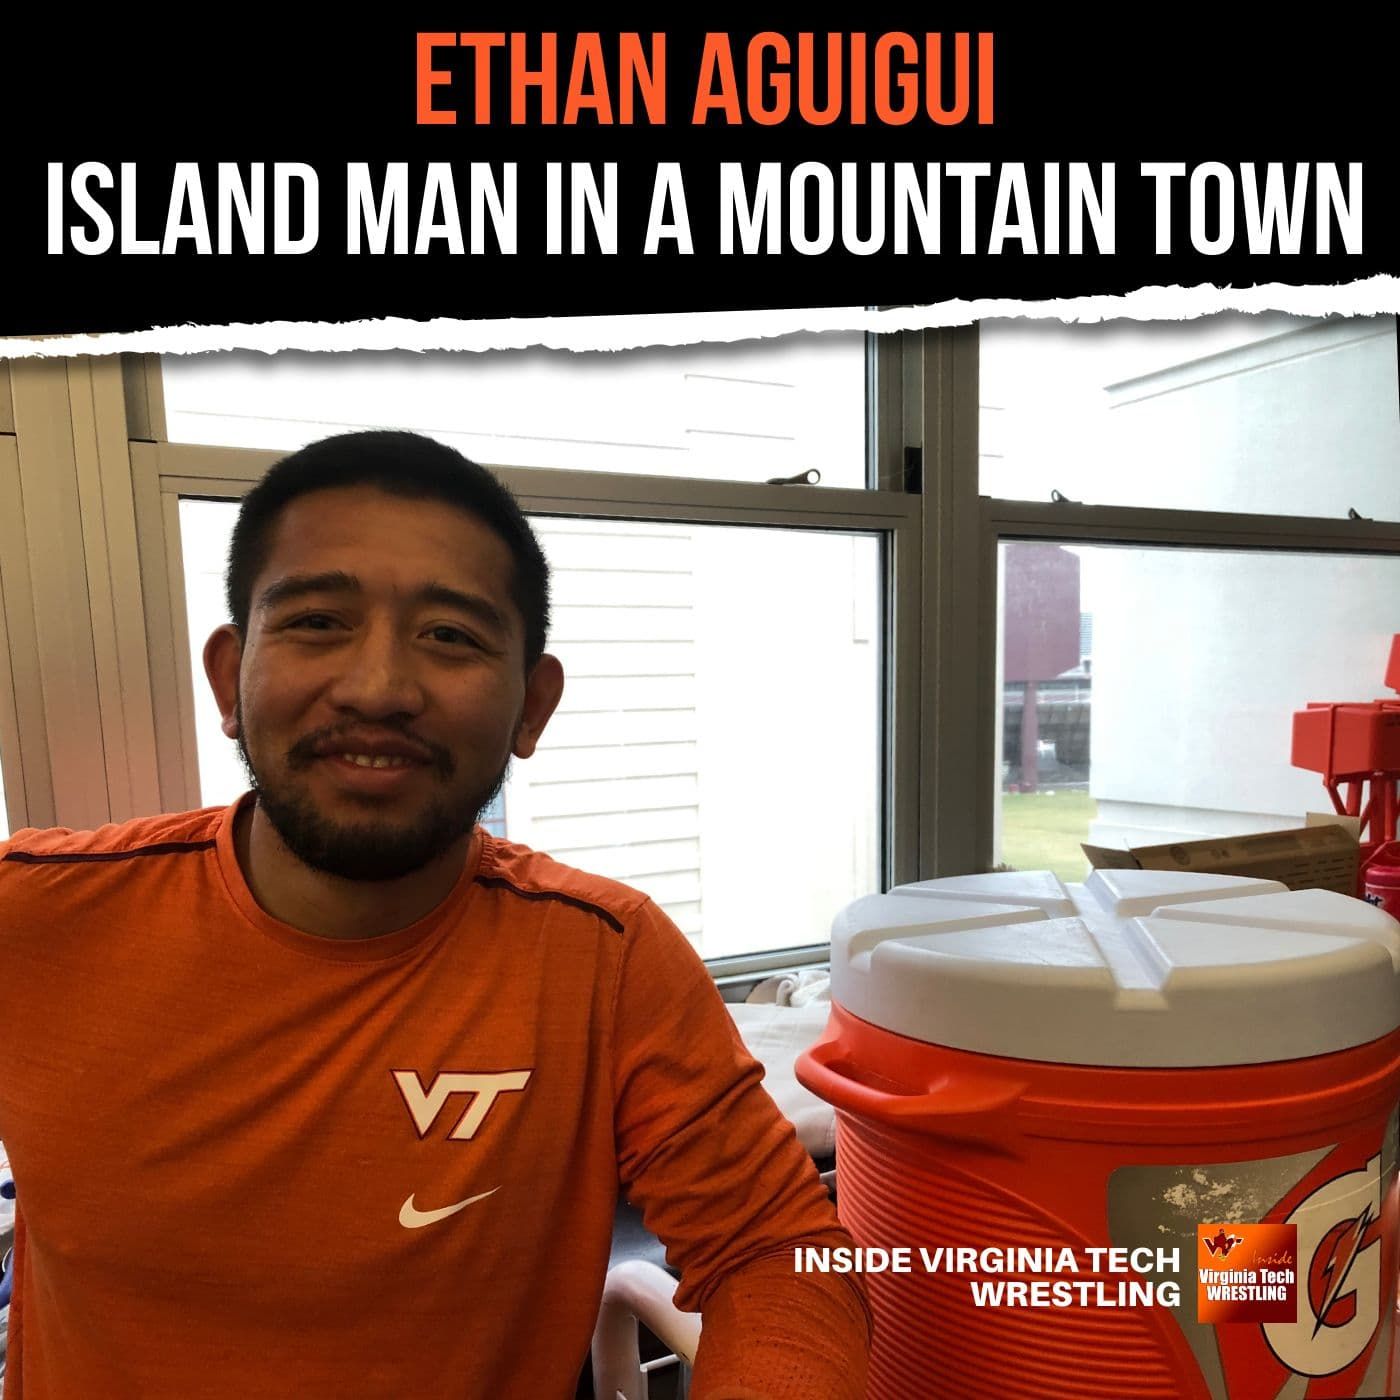 Hokie wrestling SID Ethan Aguigui's nearly 8,000-mile road from Guam to Blacksburg - VT109